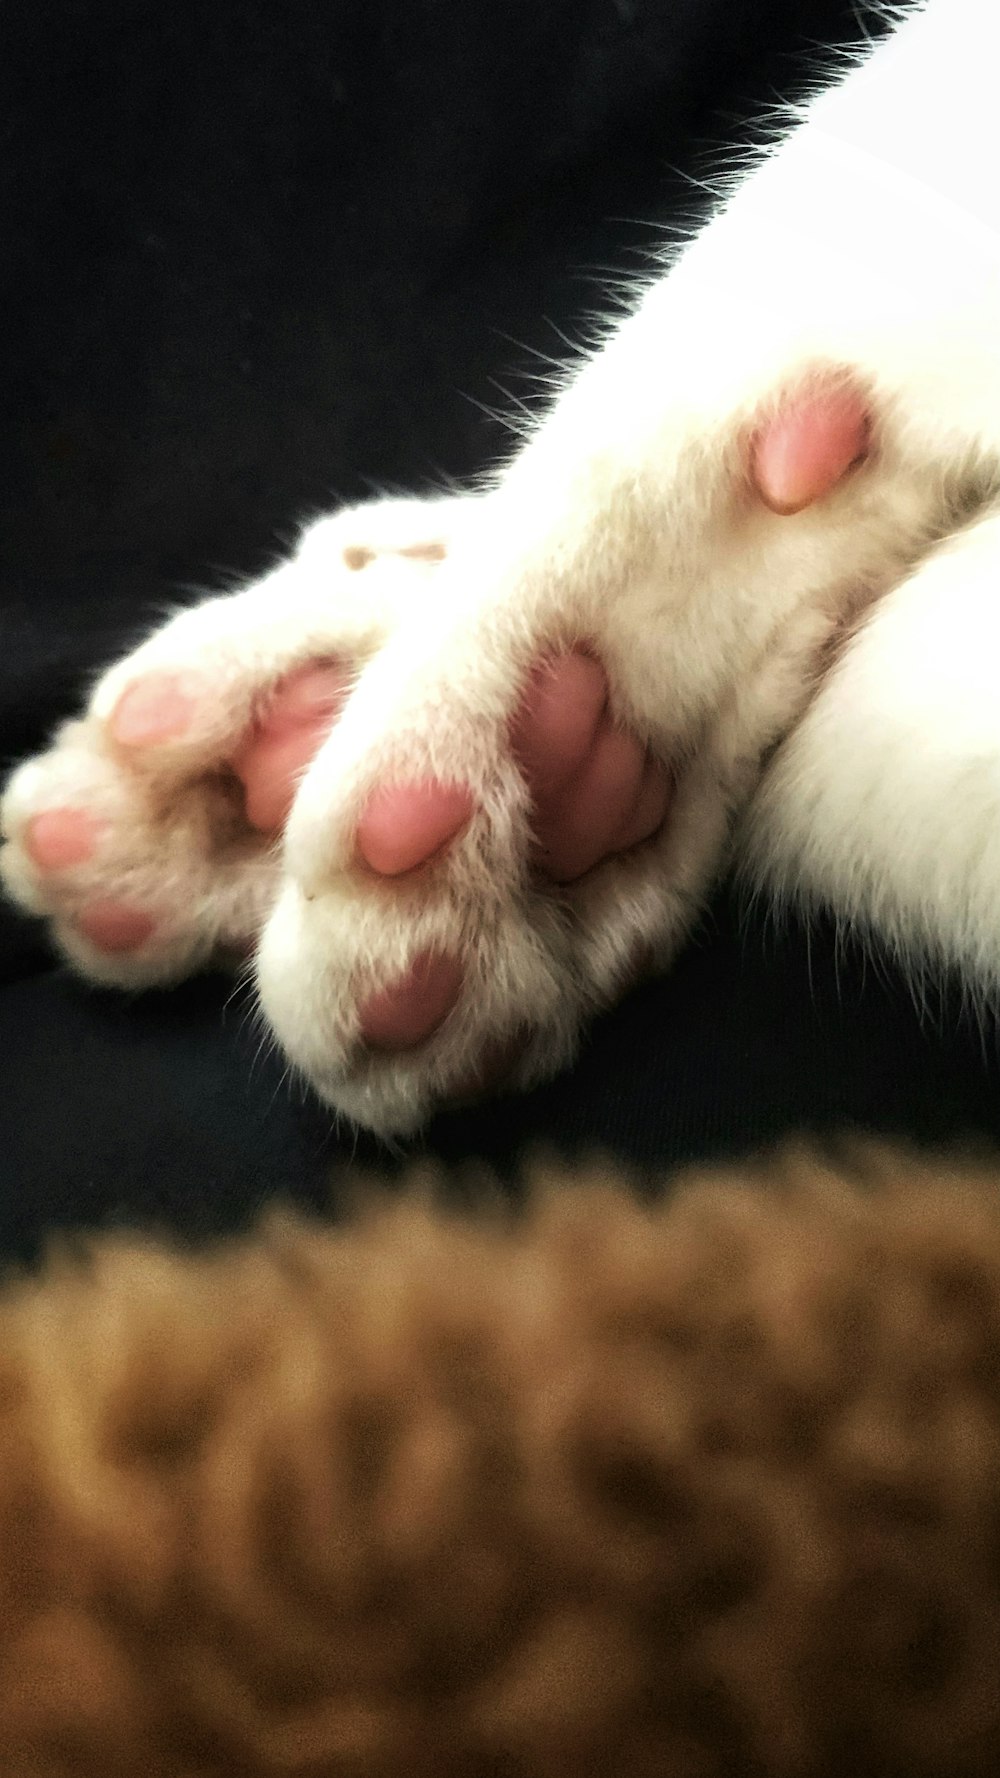 a close up of a cat's paw with it's paw stretched out